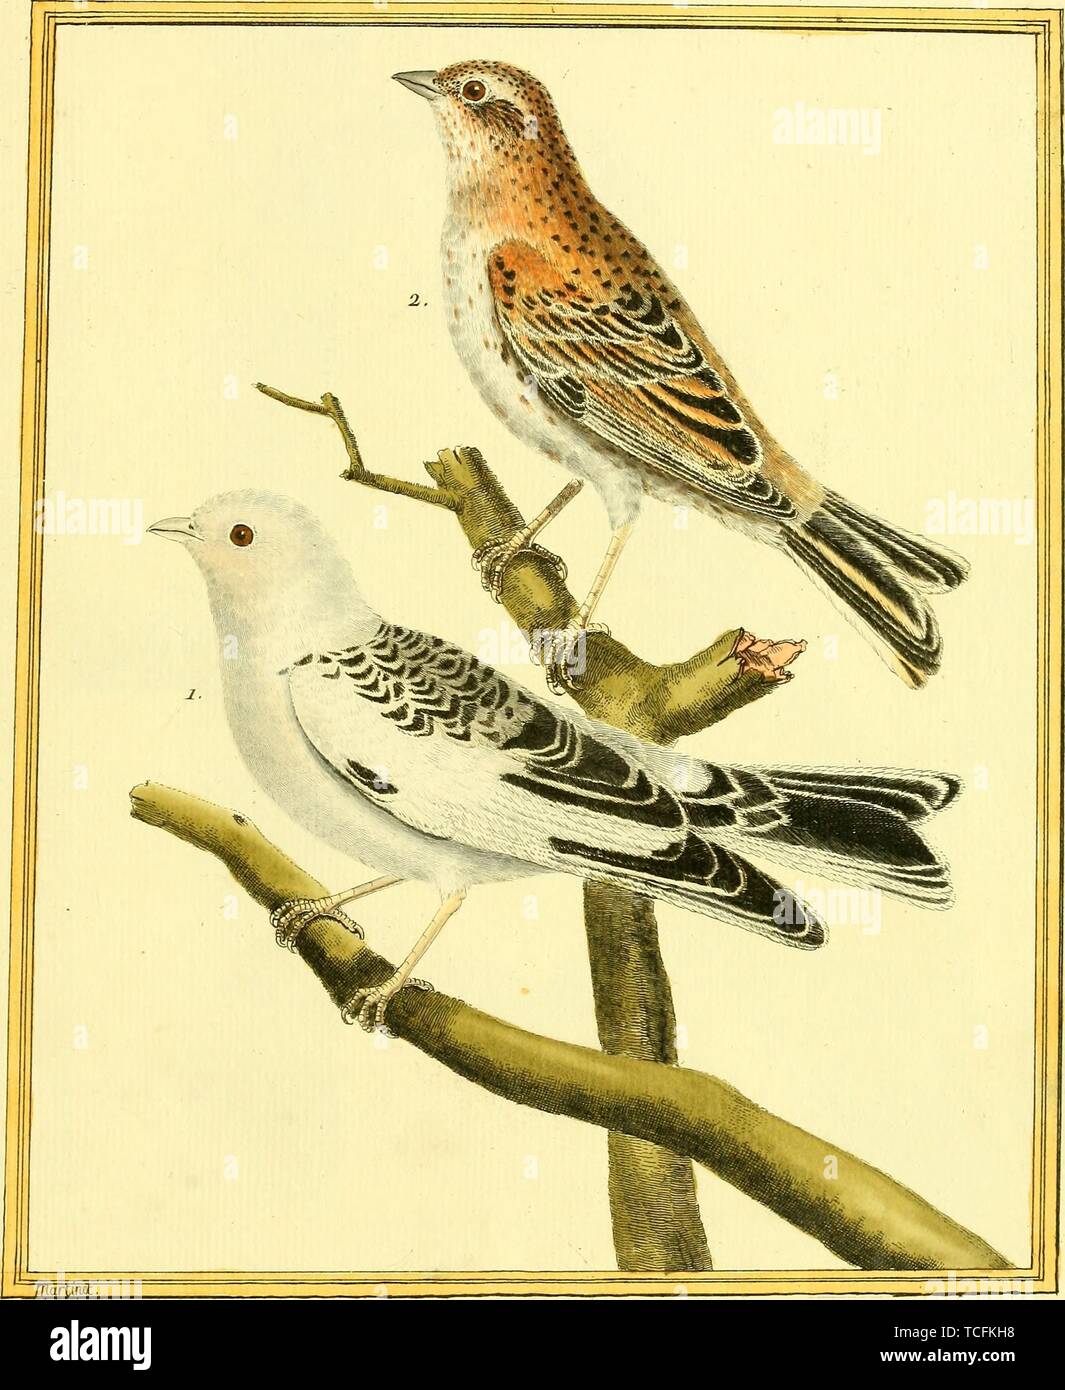 Engraved drawing of the Bramblings (Fringilla montifringilla), male and female, from the book 'Planches enluminees Dhistoire naturelle' by Francois Nicolas, Louis Jean Marie Daubenton, and Edme-Louis Daubenton, 1765. Courtesy Internet Archive. () Stock Photo